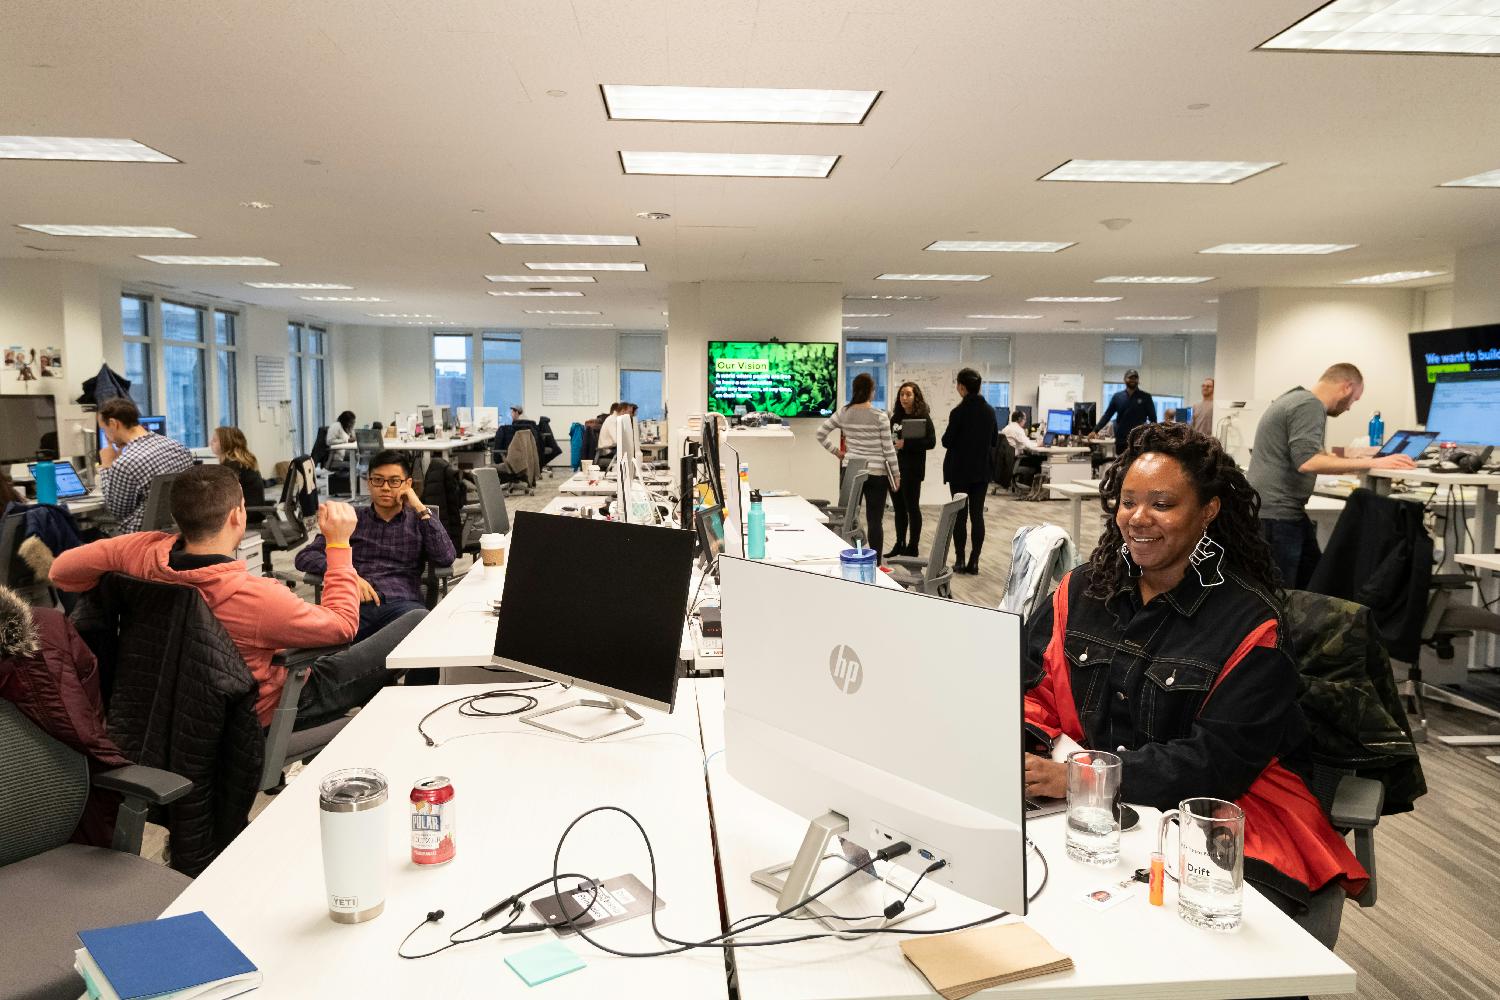 Our open office floor plan encourages collaboration across teams and a constant flow of ideas throughout the day.